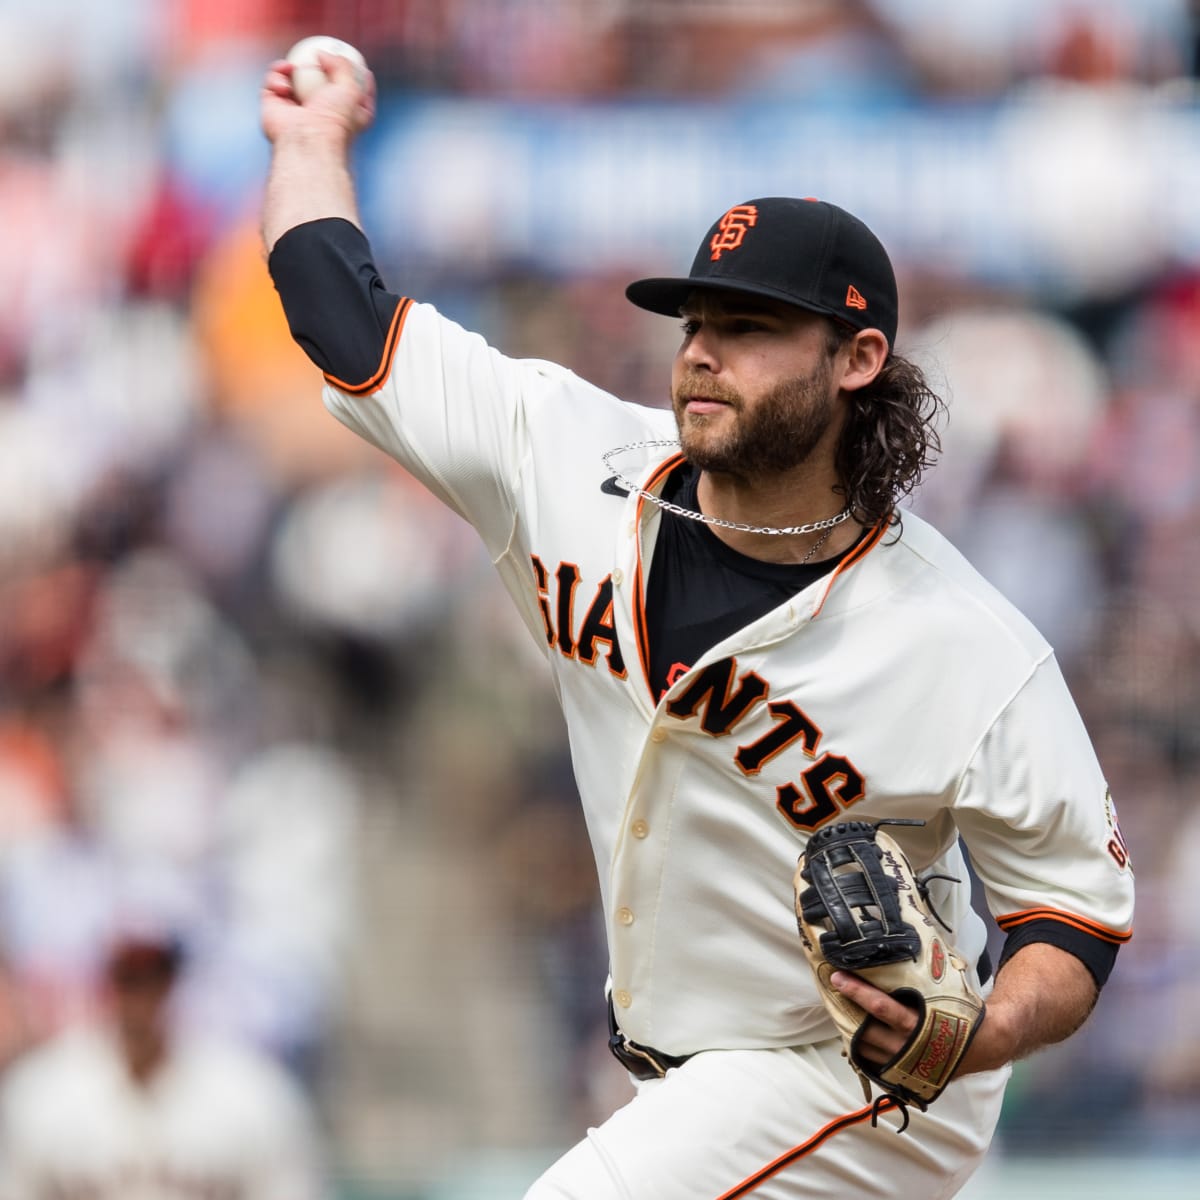 Brandon Crawford Leaves the Giants After 13 Seasons